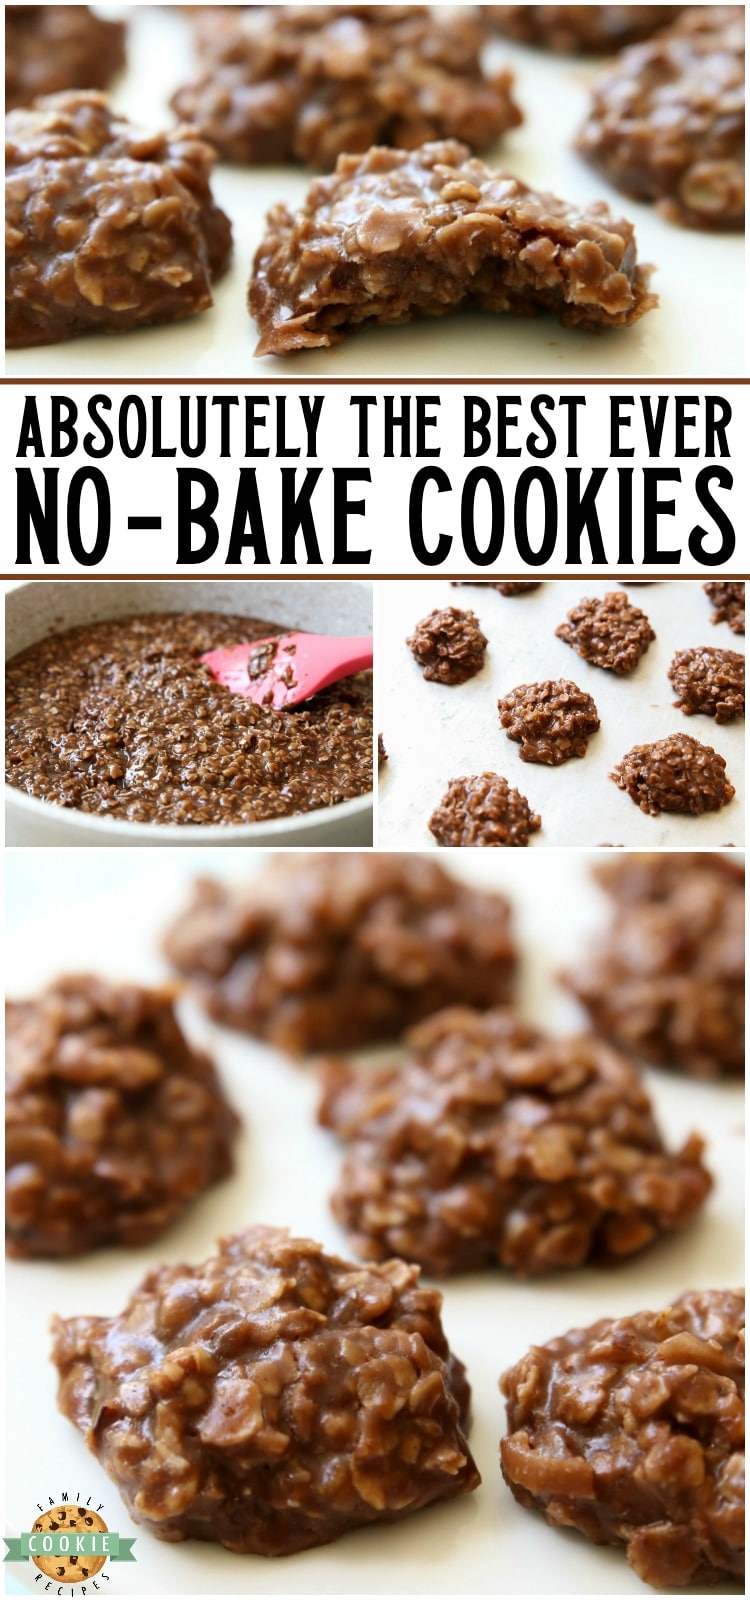 Easy No Bake Cookies are simple, oatmeal chocolate cookies that don't require baking time! I've tried many & this peanut butter no bake cookies recipe is the absolute BEST. #nobake #cookies #chocolate #peanutbutter #oatmeal #dessert #recipe from FAMILY COOKIE RECIPES